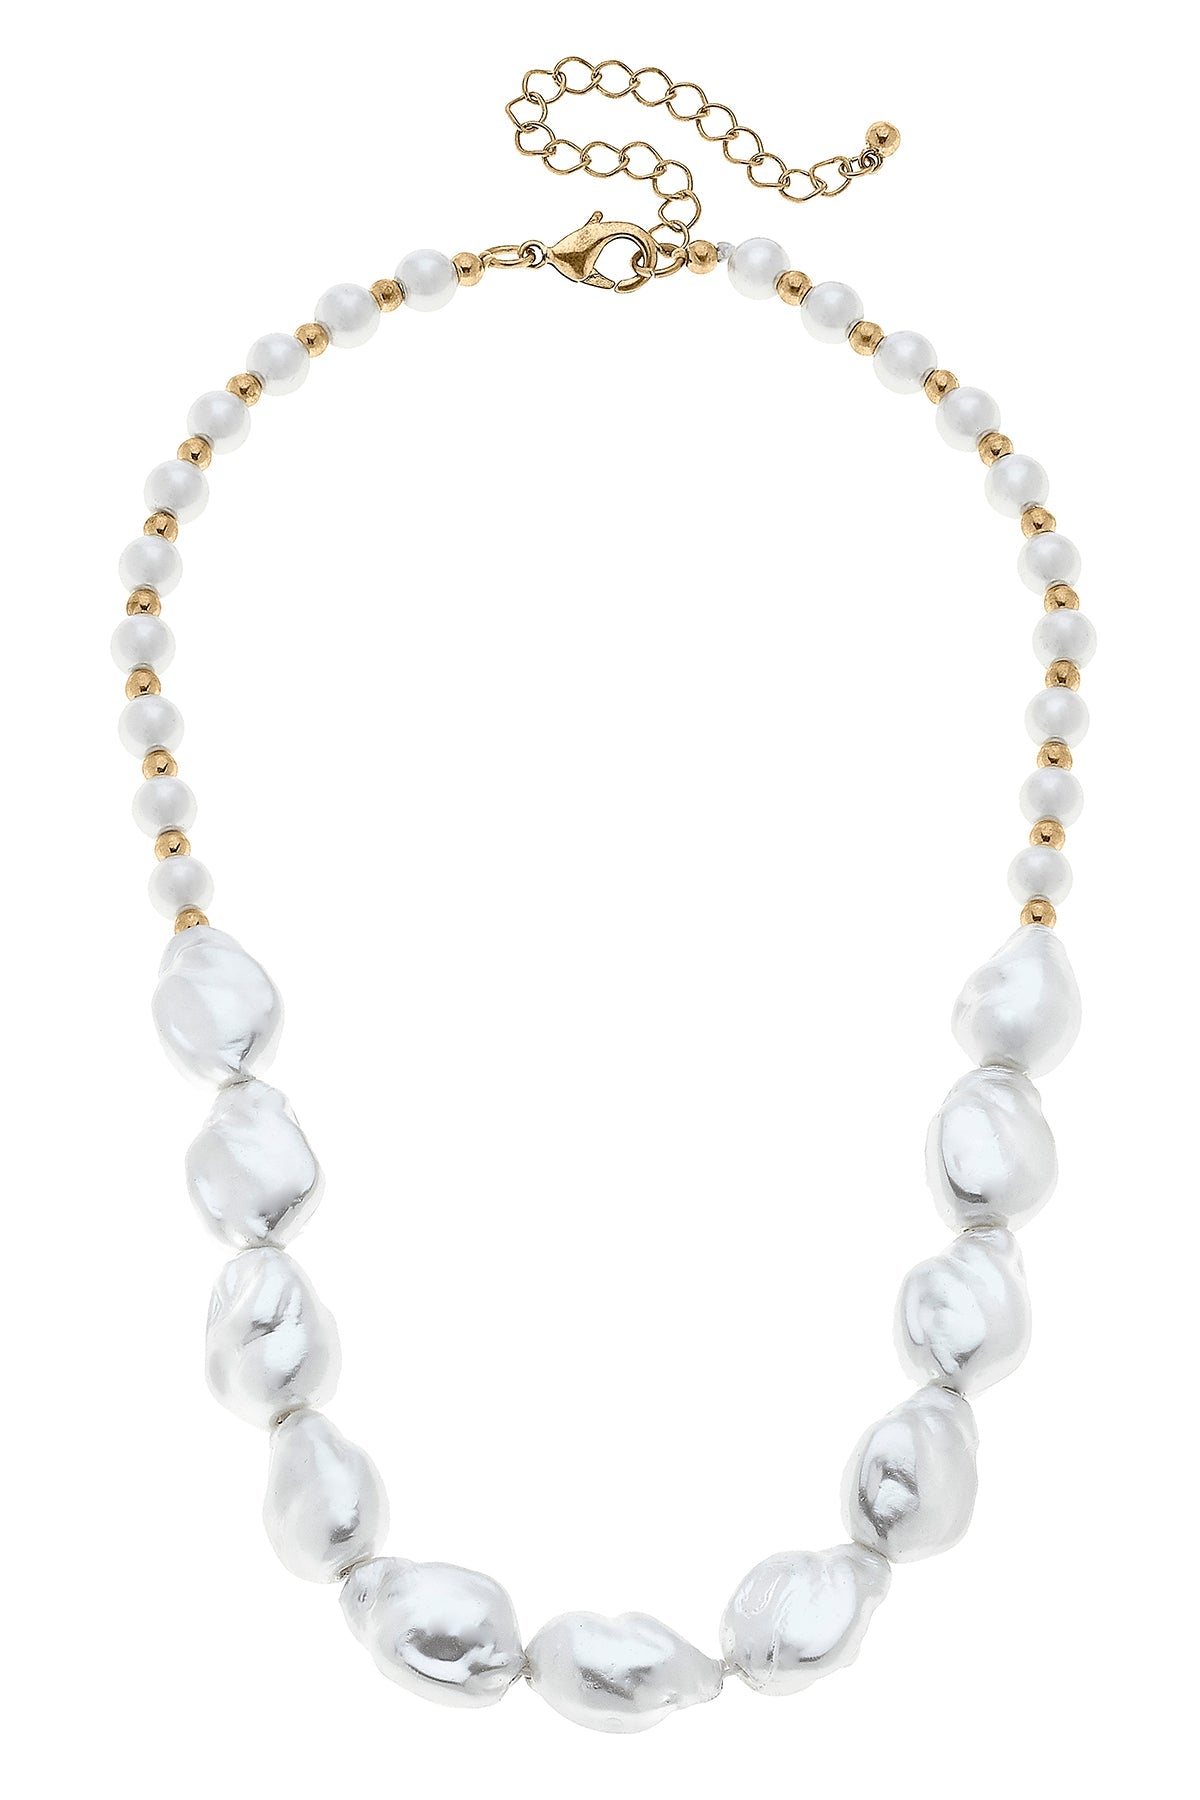 Summer Baroque Pearl & Seed Bead Necklace in Ivory